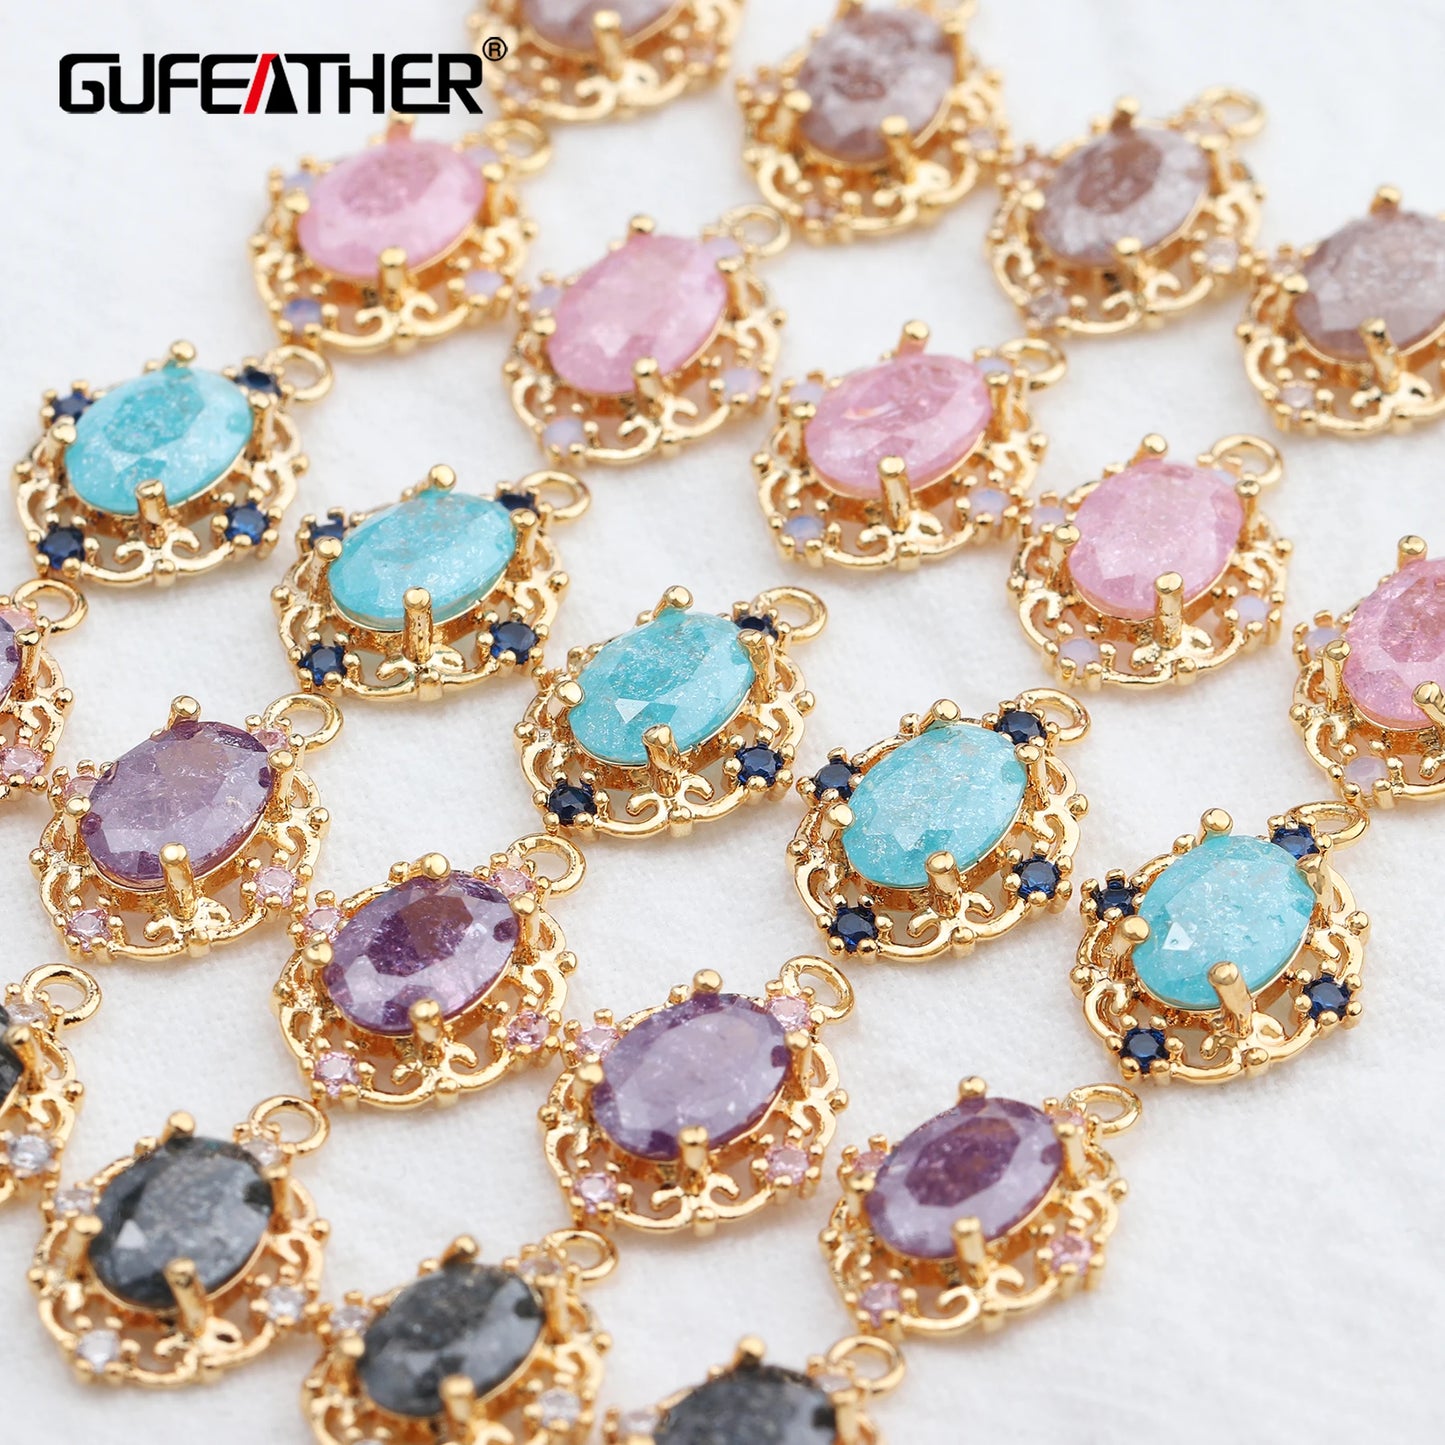 GUFEATHER M589,jewelry accessories,pass REACH,nickel free,18k gold plated,zircon pendant,diy earrings,jewelry making,6pcs/lot